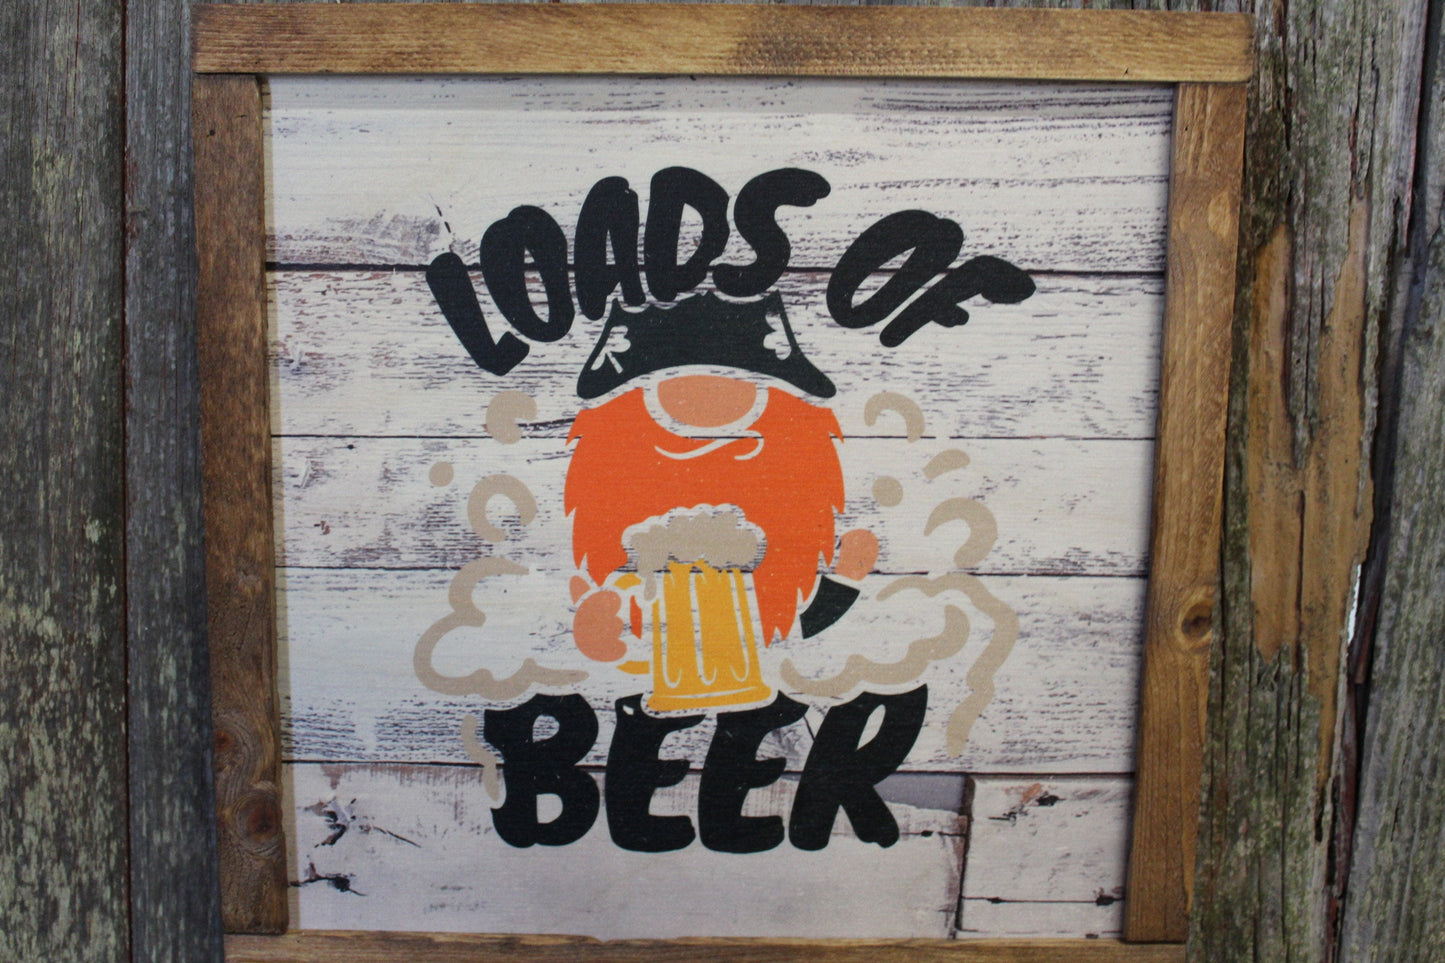 Loads Of Beer Wood Sign Gnome St Paddys Day St Patricks Day Irish Décor Print Wall Art Decoration Wall Hanging Farmhouse Rustic Shiplap Elf